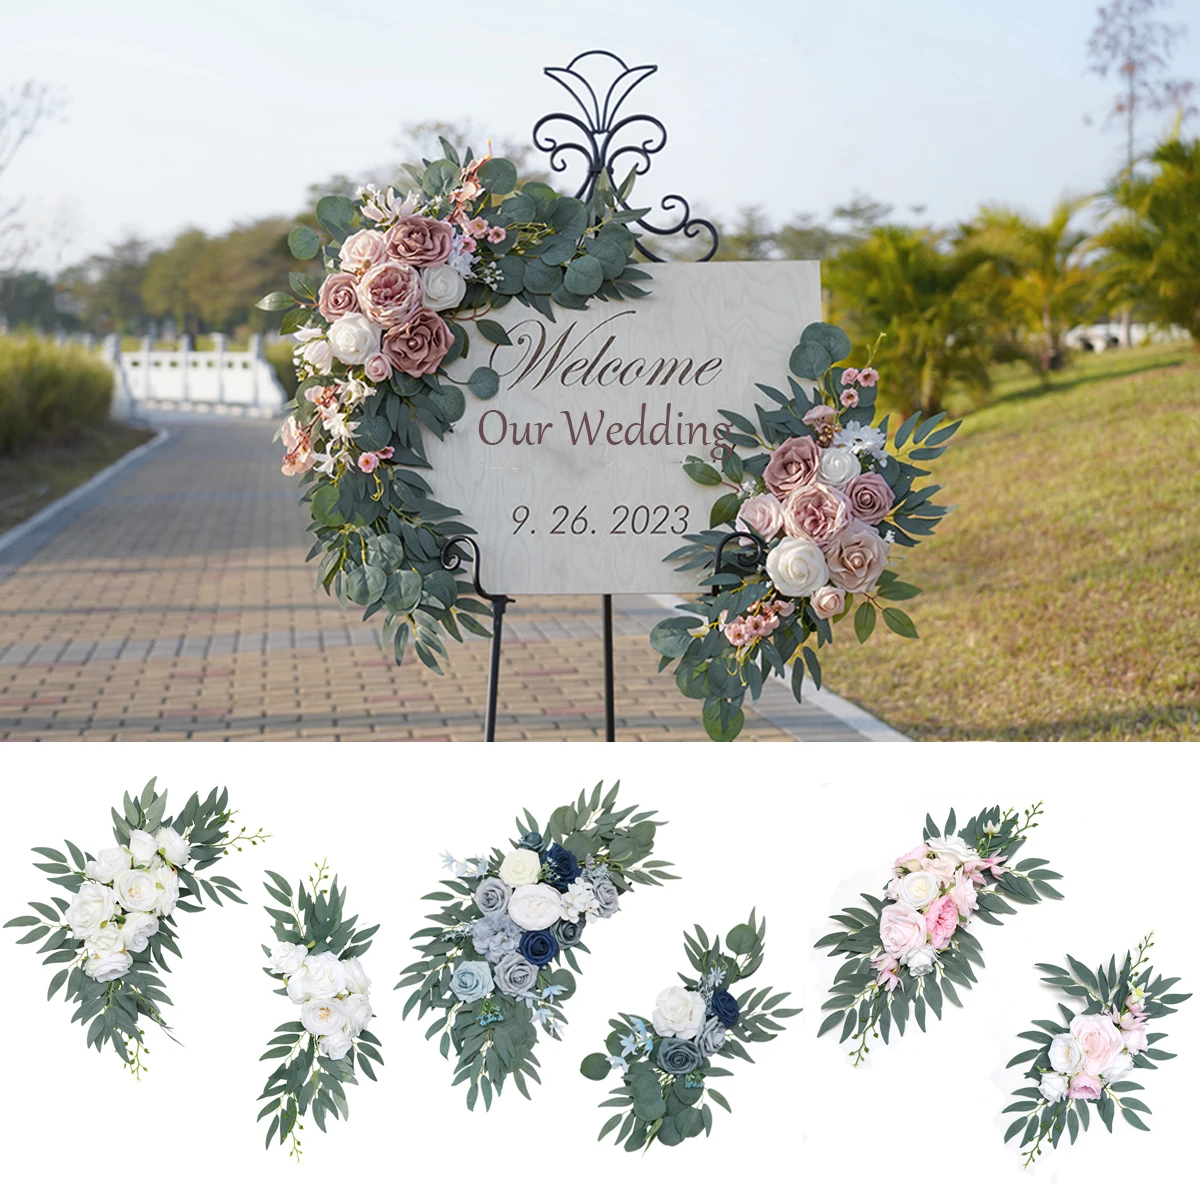 Yannew Artificial Wedding Arch Flowers Kit Boho Dusty Rose Blue Eucalyptus Garland Drapes for Wedding Decorations Welcome Sign